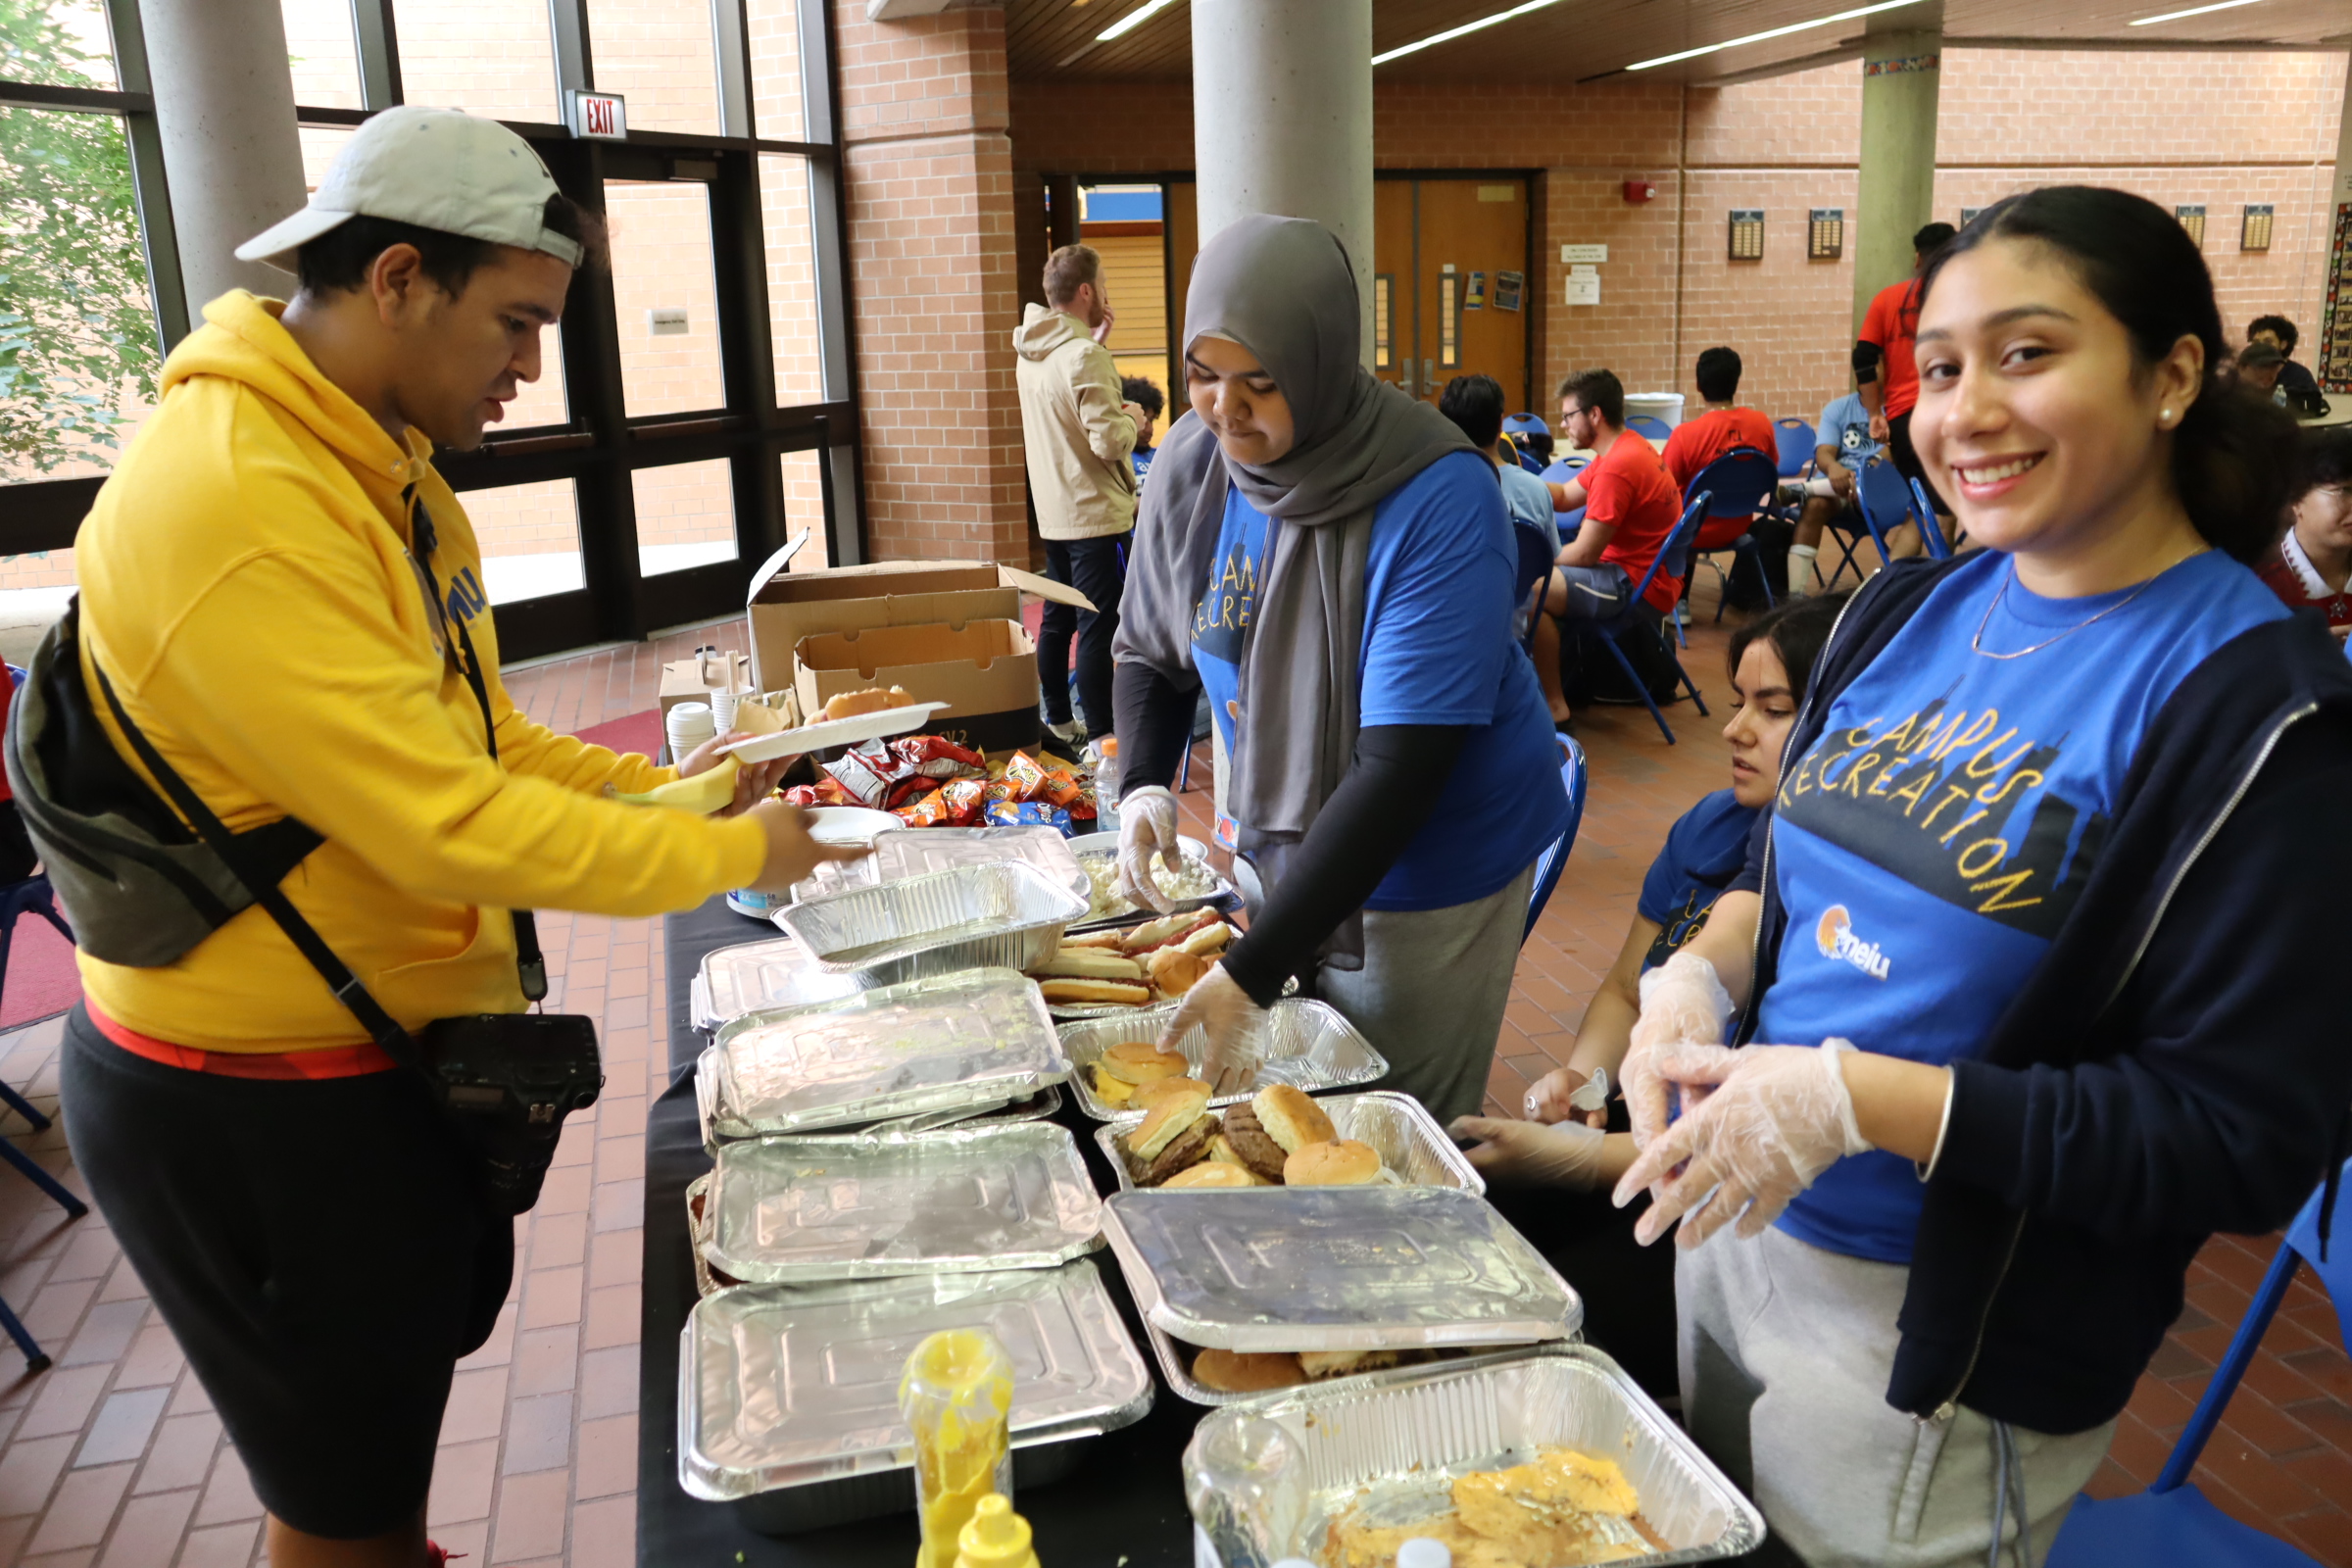 Students serving food at a fundraising event